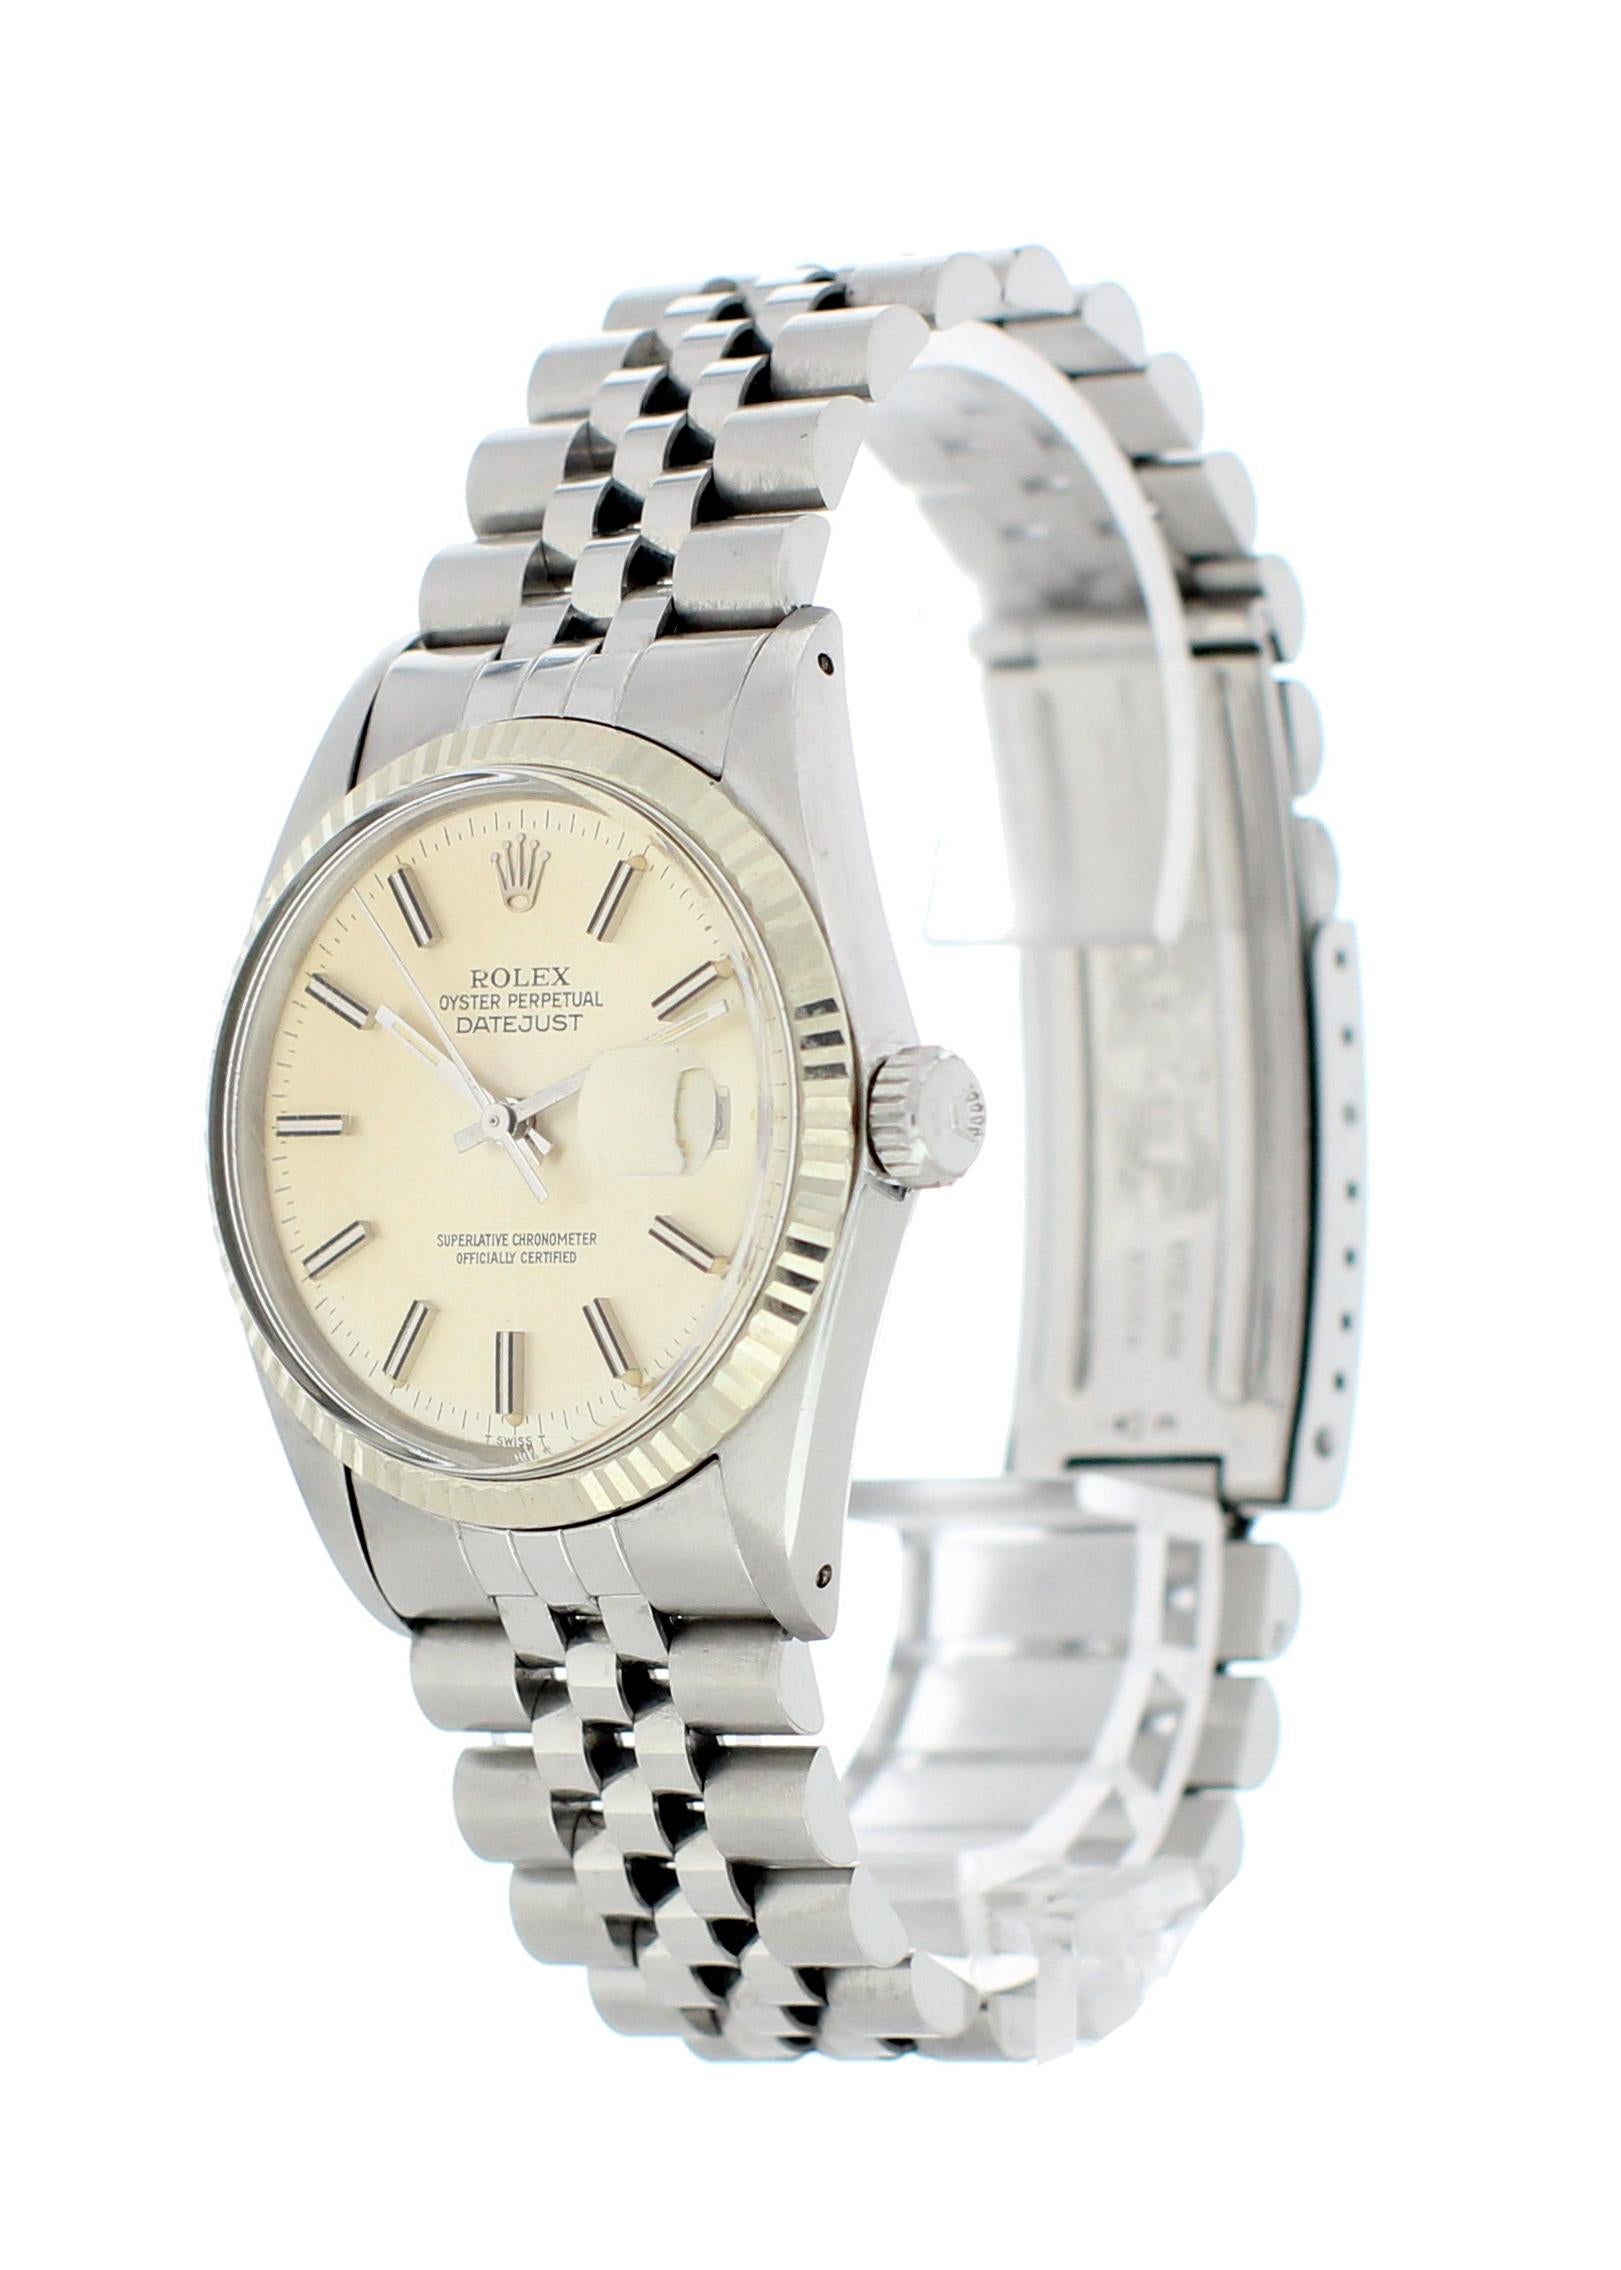 Rolex Oyster Perpetual Datejust 16014 Men's Watch. Stainless steel 36mm case. 18k white gold bezel. Silver dial with steel hands and markers. Date aperture with quickset function. Stainless steel jubilee band with fold over clasp. Will fit up to a